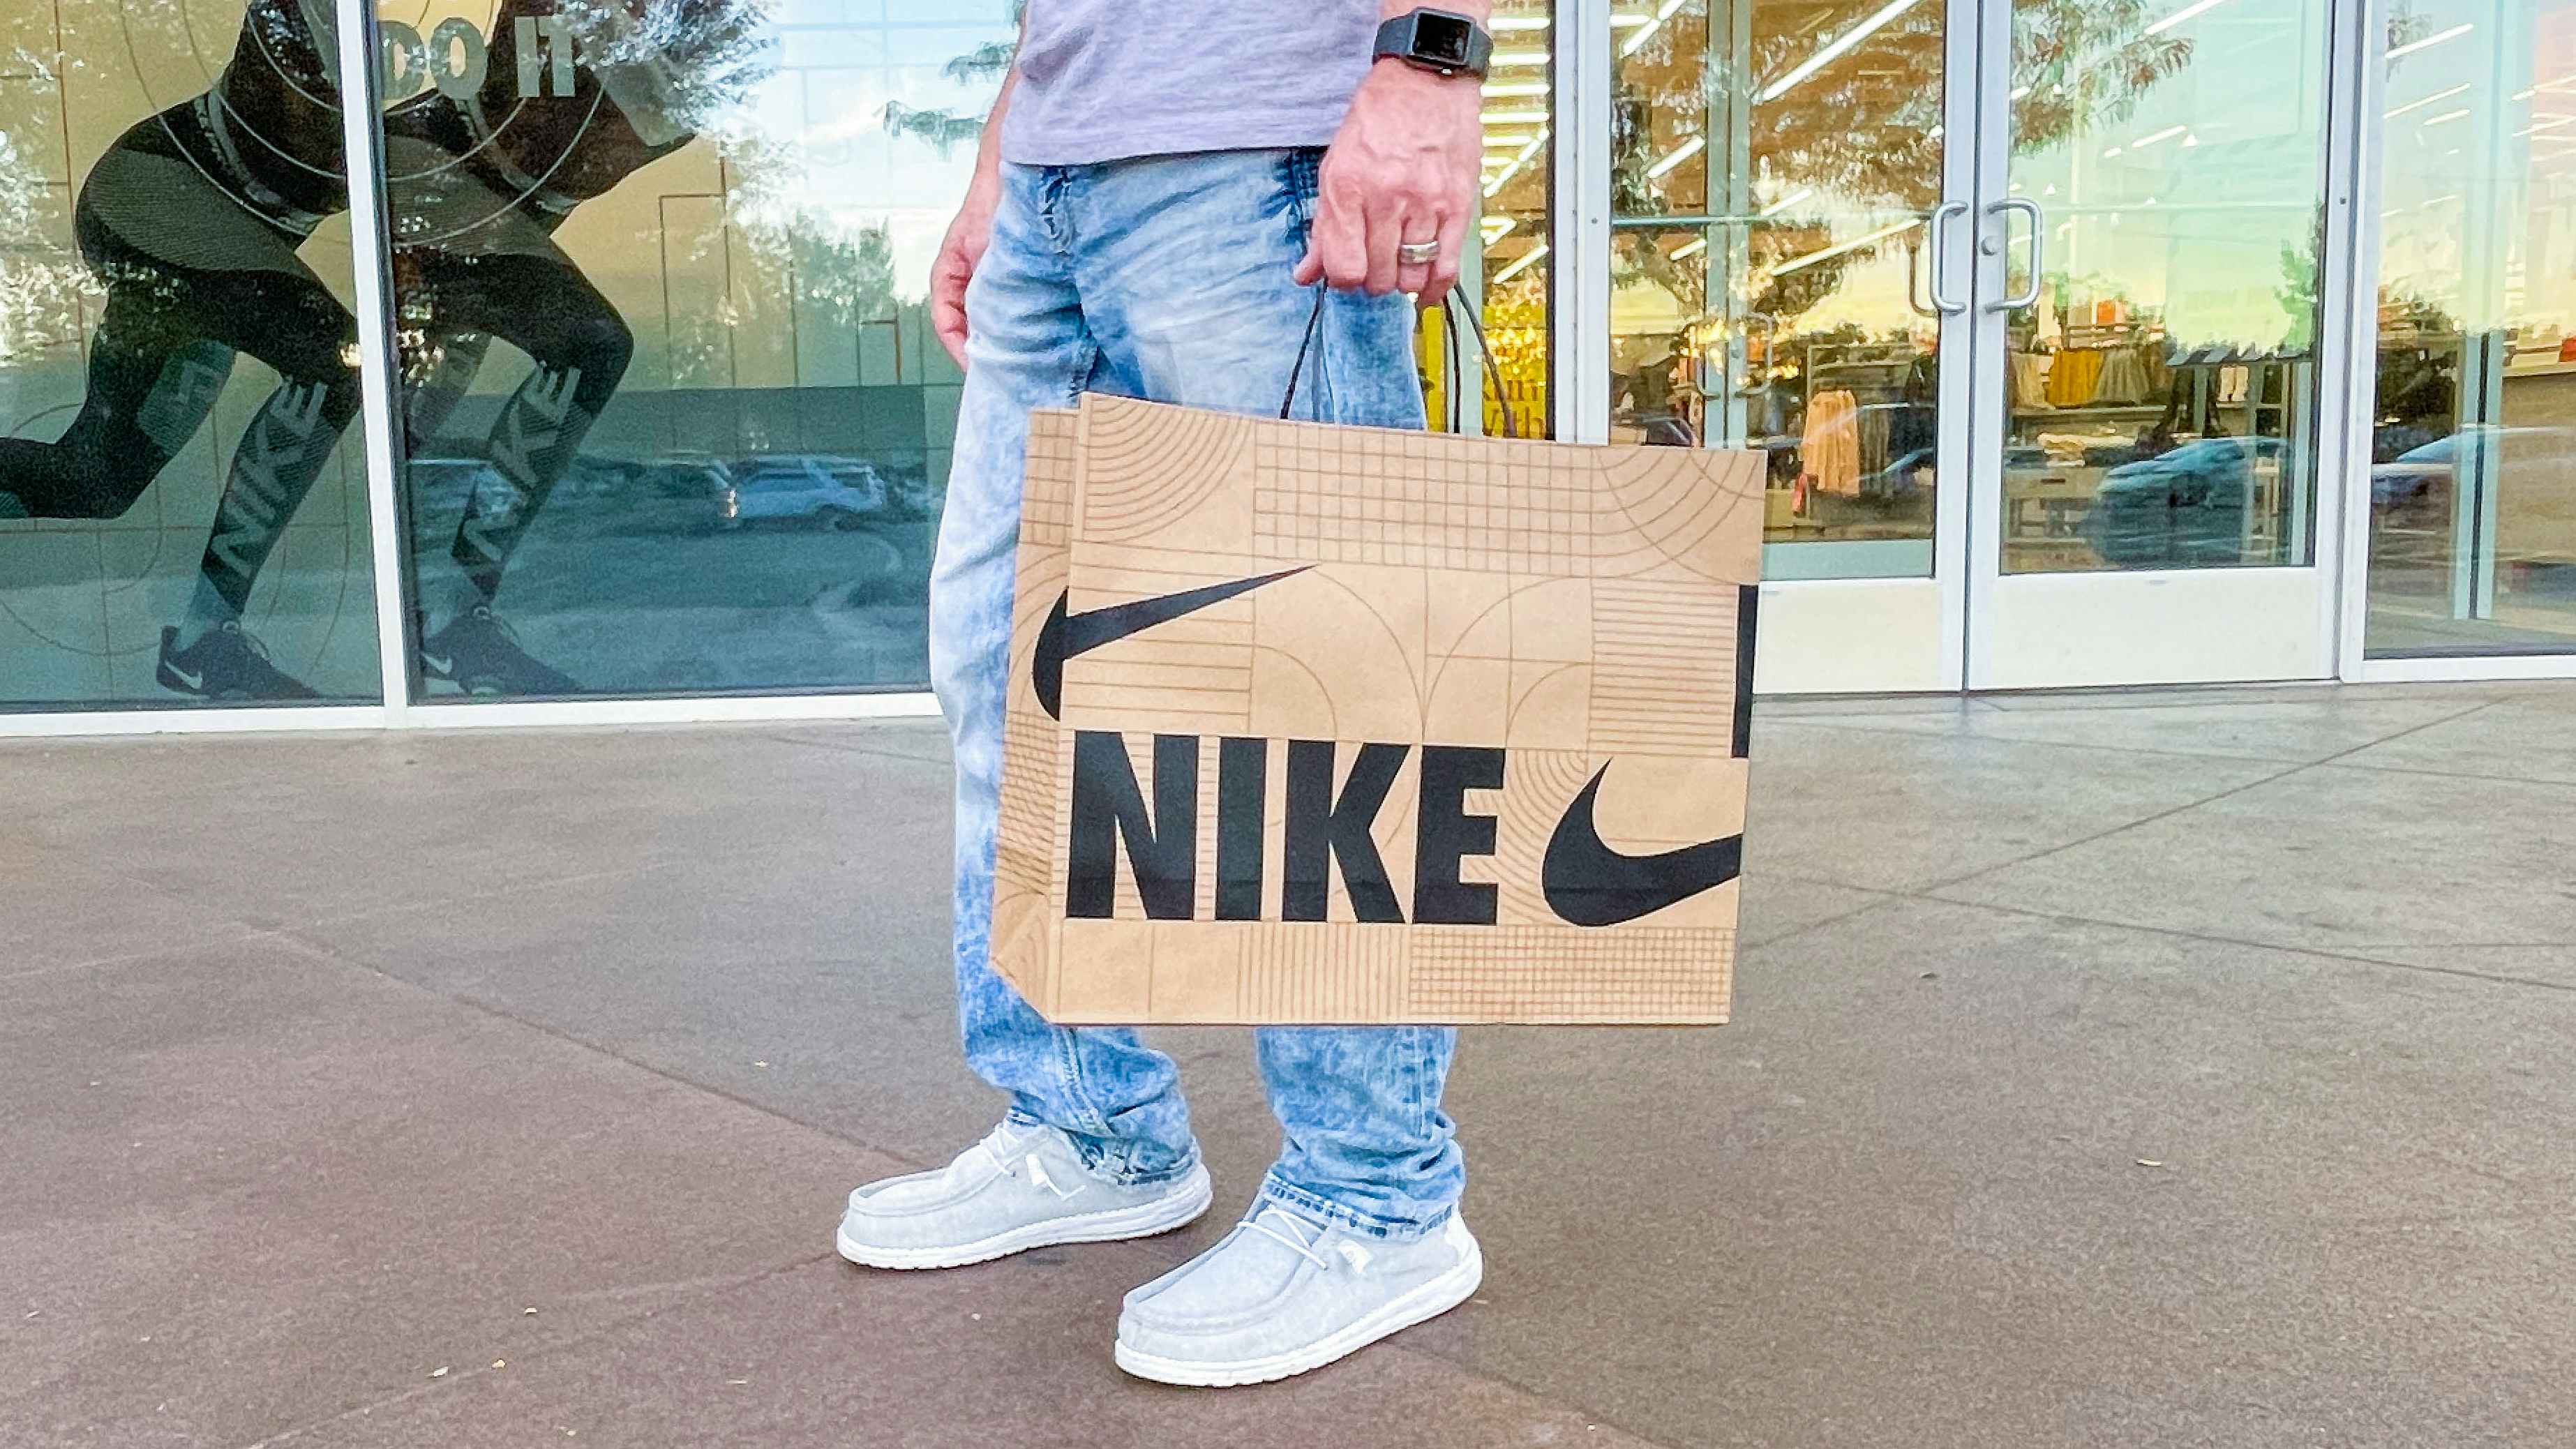 nike-store-front-shopping-guide-storefront-entrance-customer-bag-military-discount-online-order-pickup-black-friday-sale-return-featured-crop